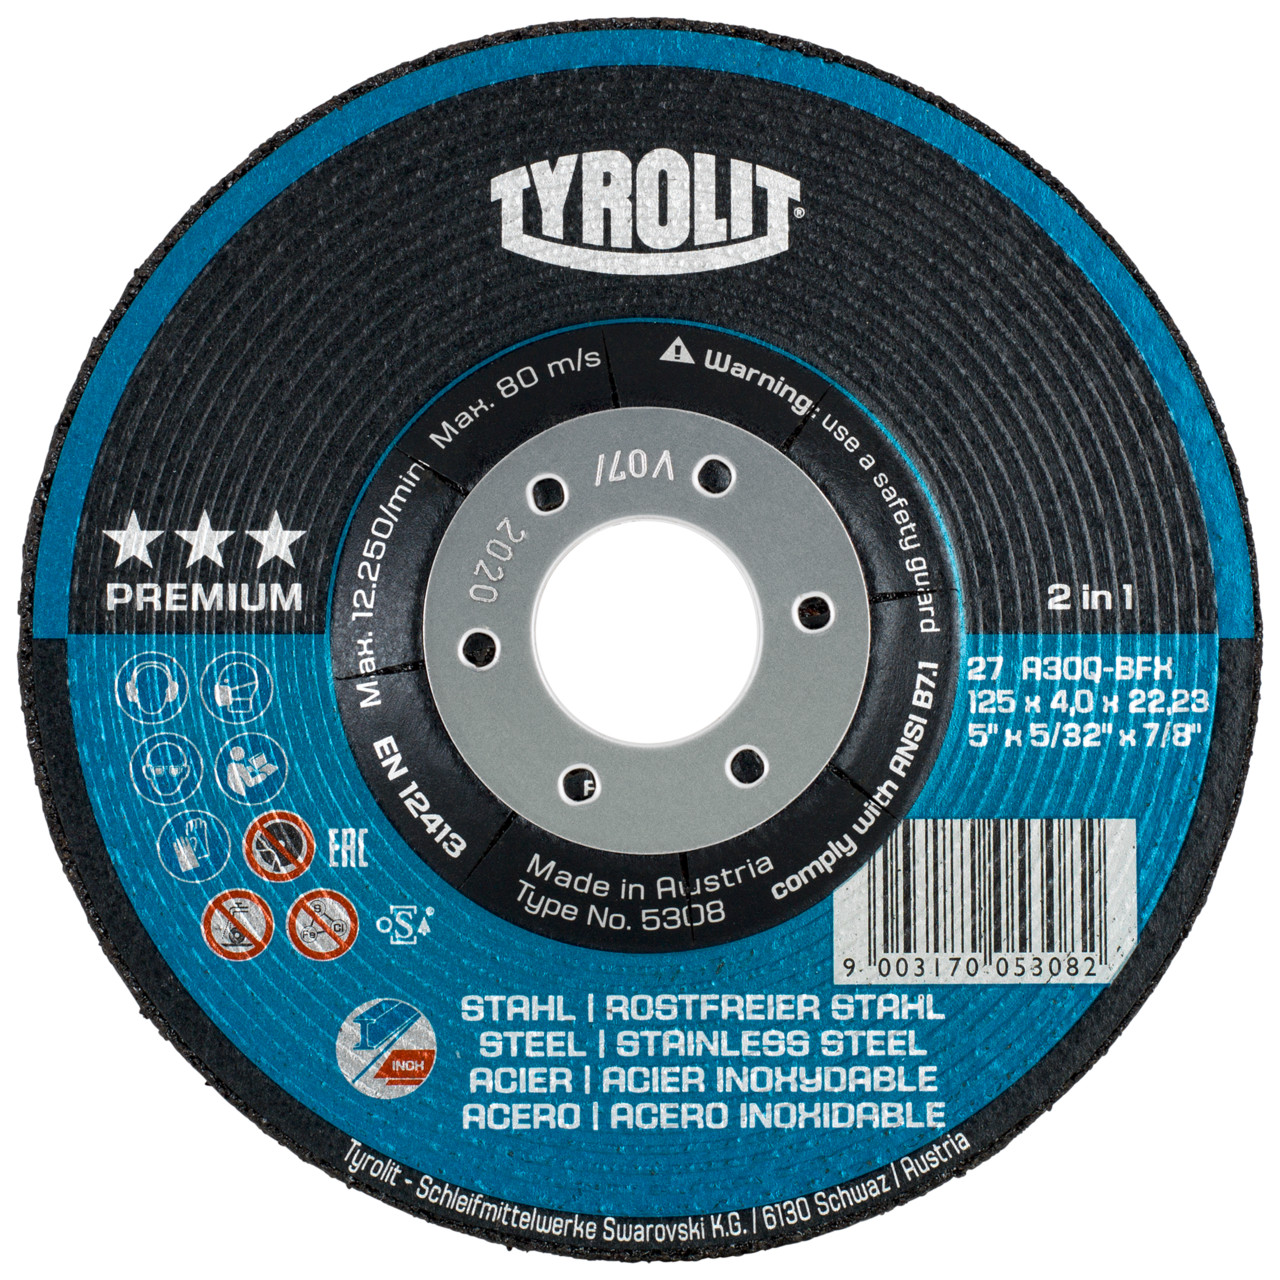 TYROLIT grinding wheel DxUxH 150x4x22.23 2in1 for steel and stainless steel, shape: 27 - offset version, Art. 734378